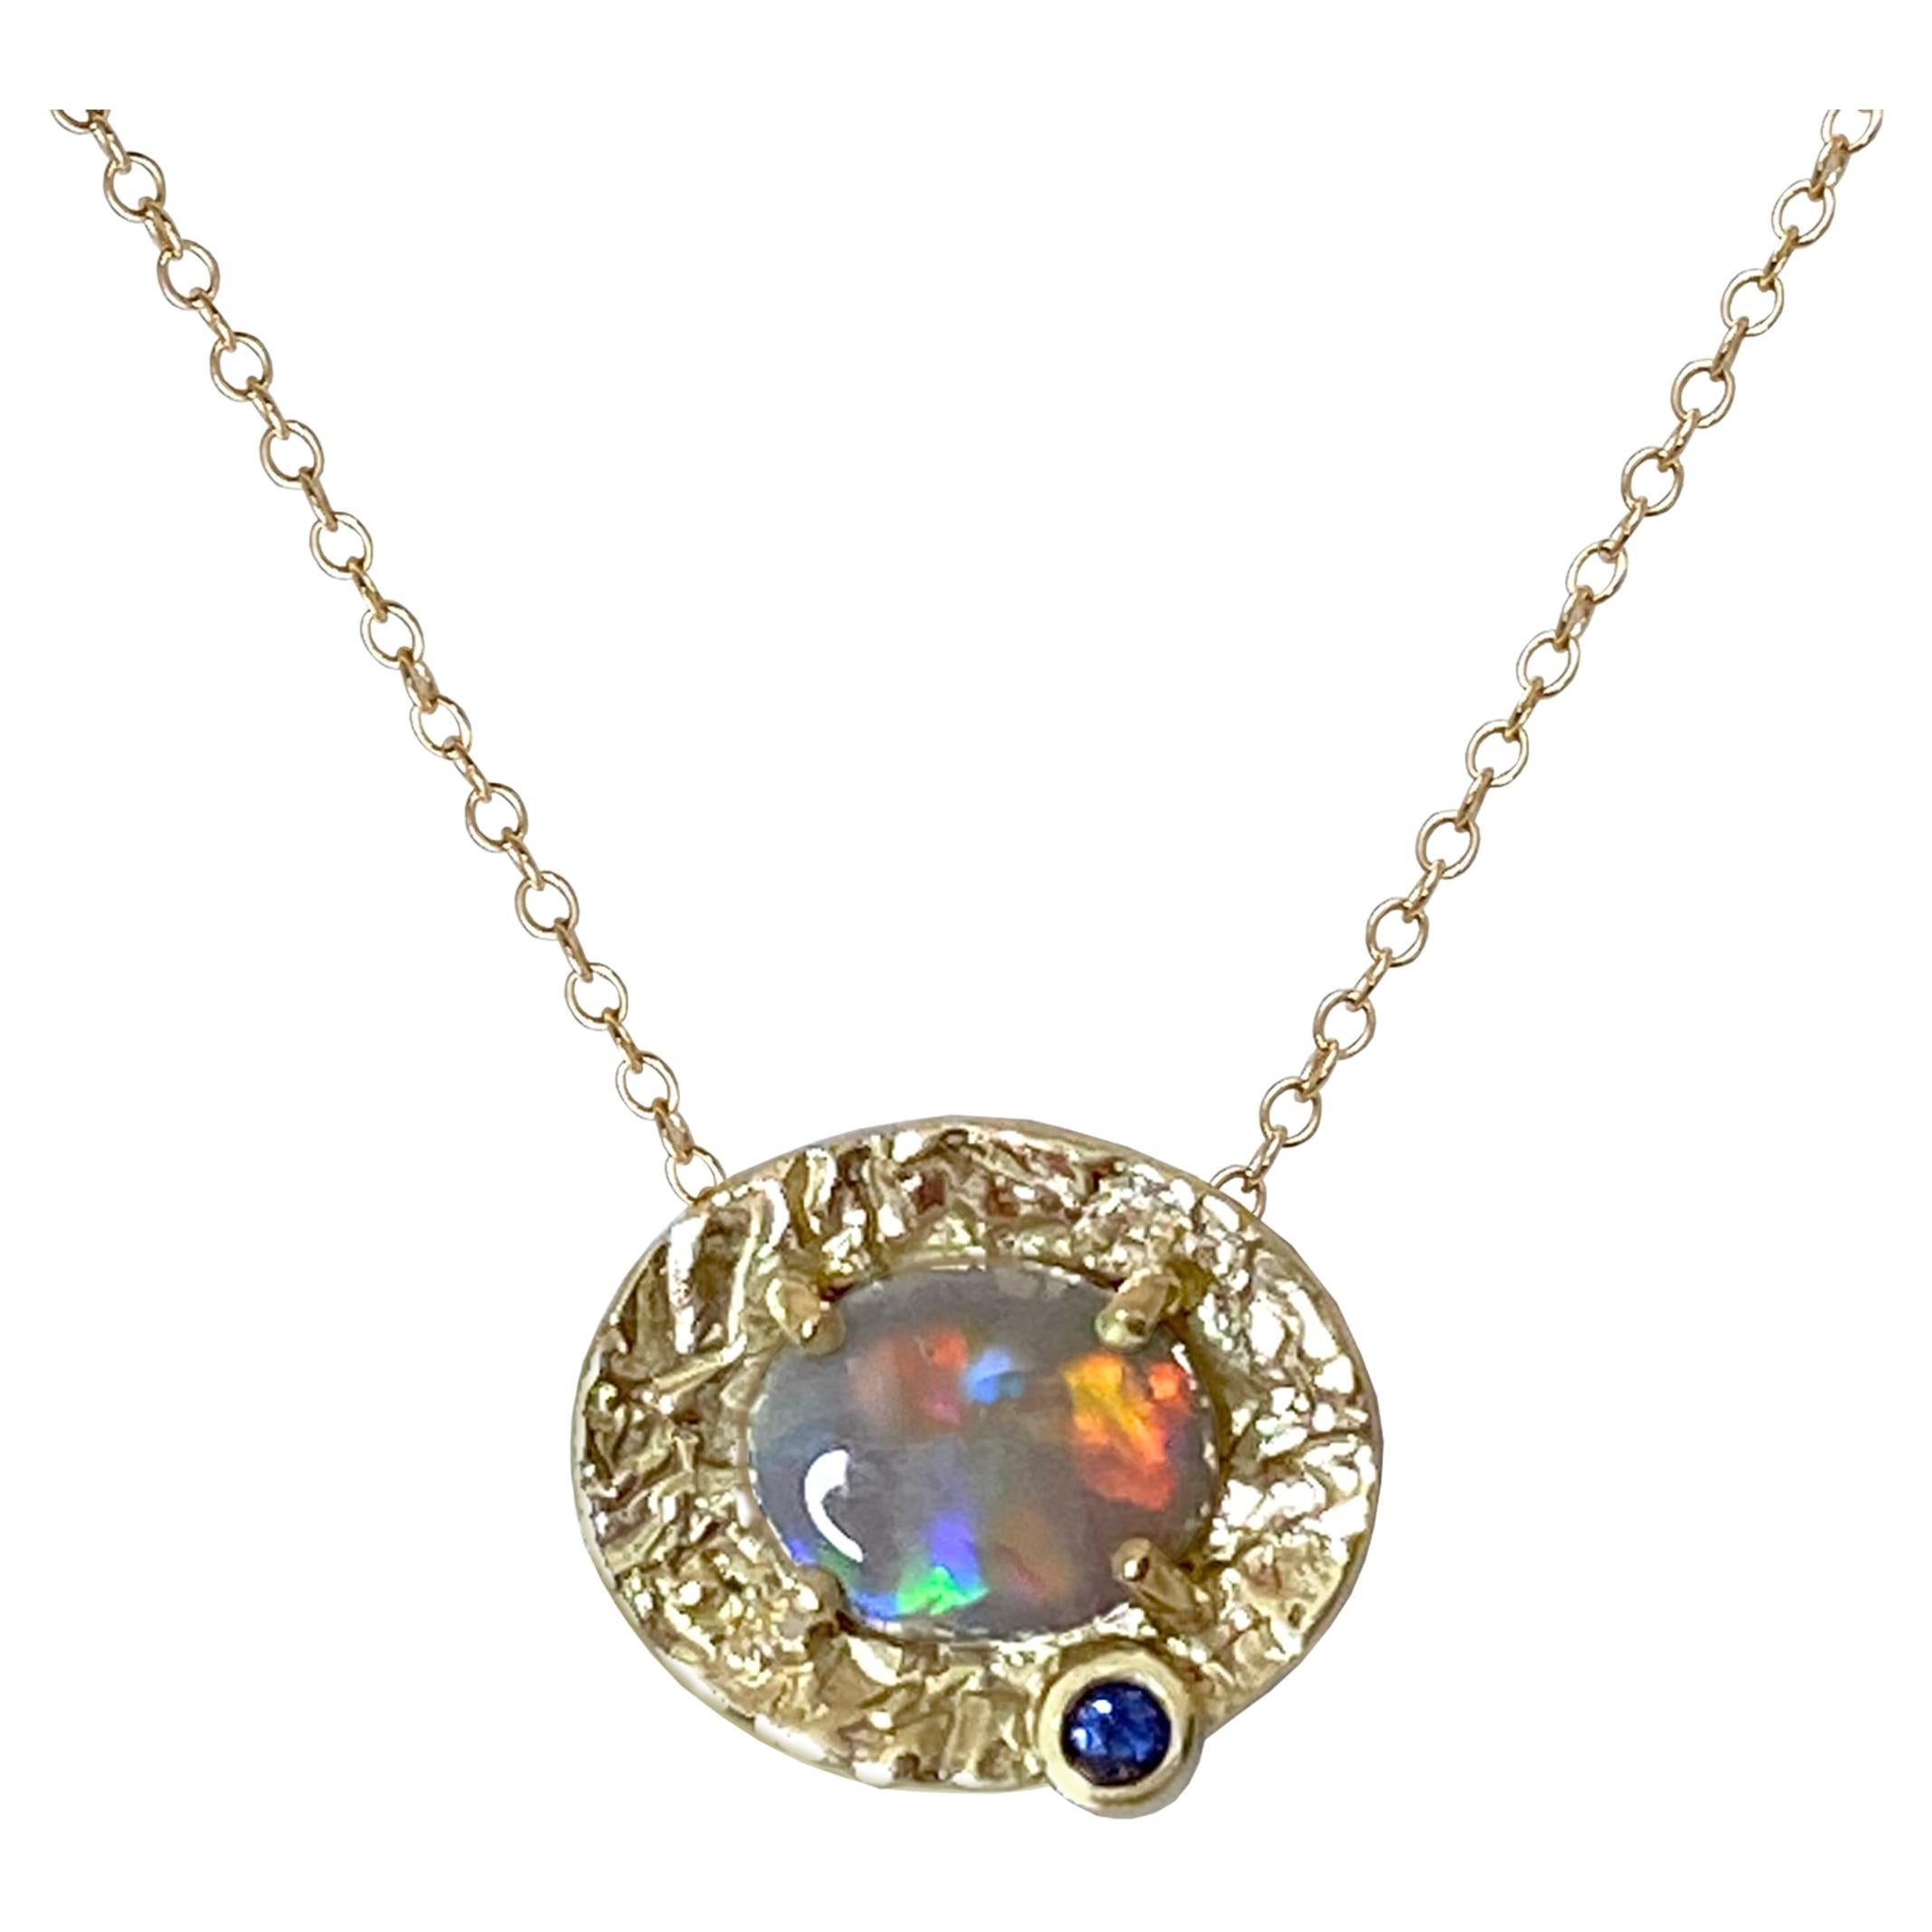 Petite Marigold Necklace, Opal set in 14 Karat Yellow Gold Frame, Blue Sapphire For Sale